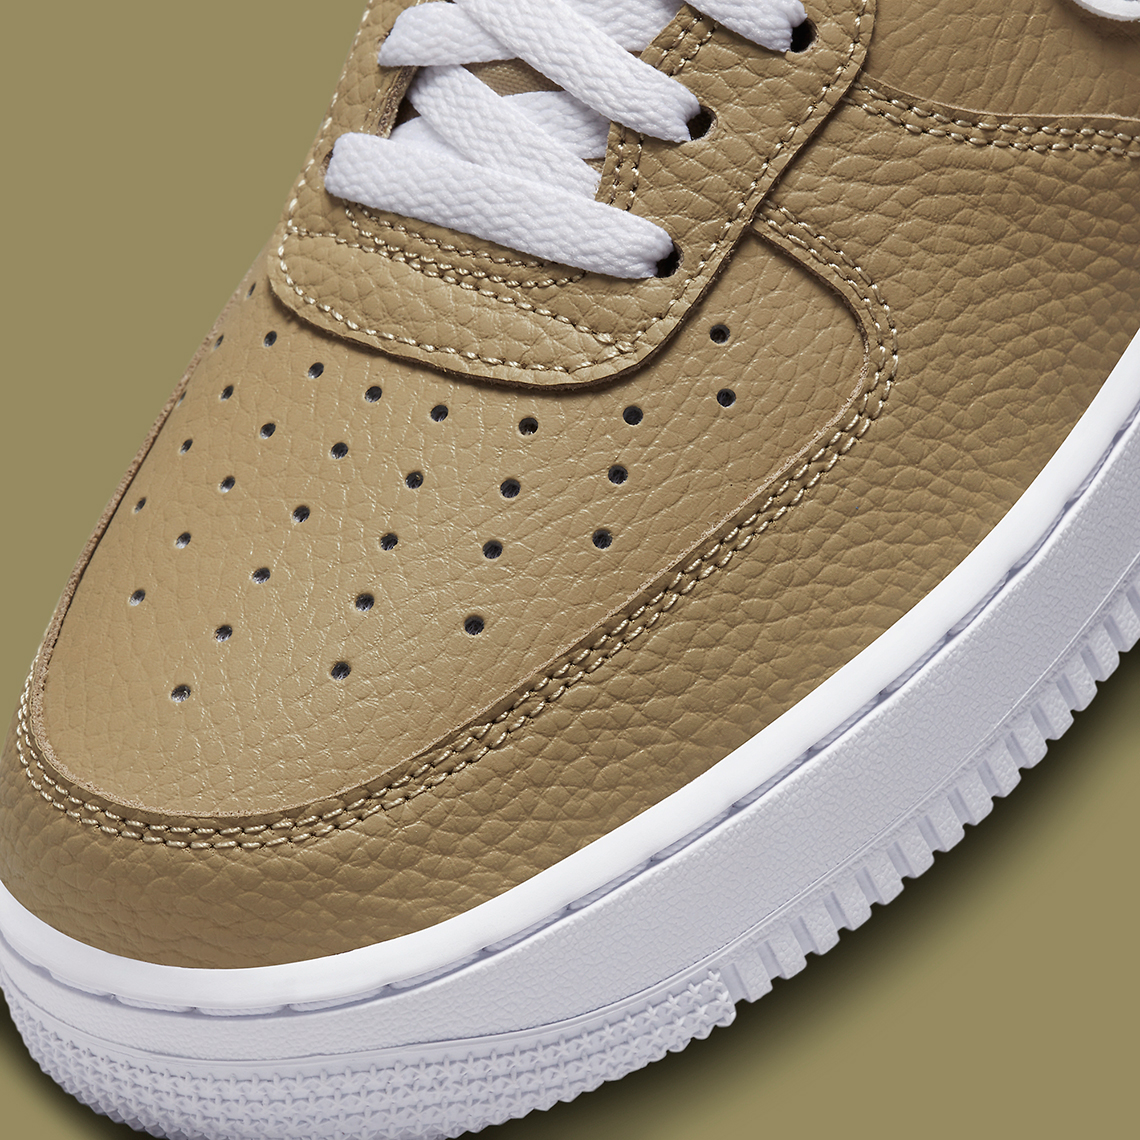 Nike Air Force 1 Low Olive Dv0804 200 1